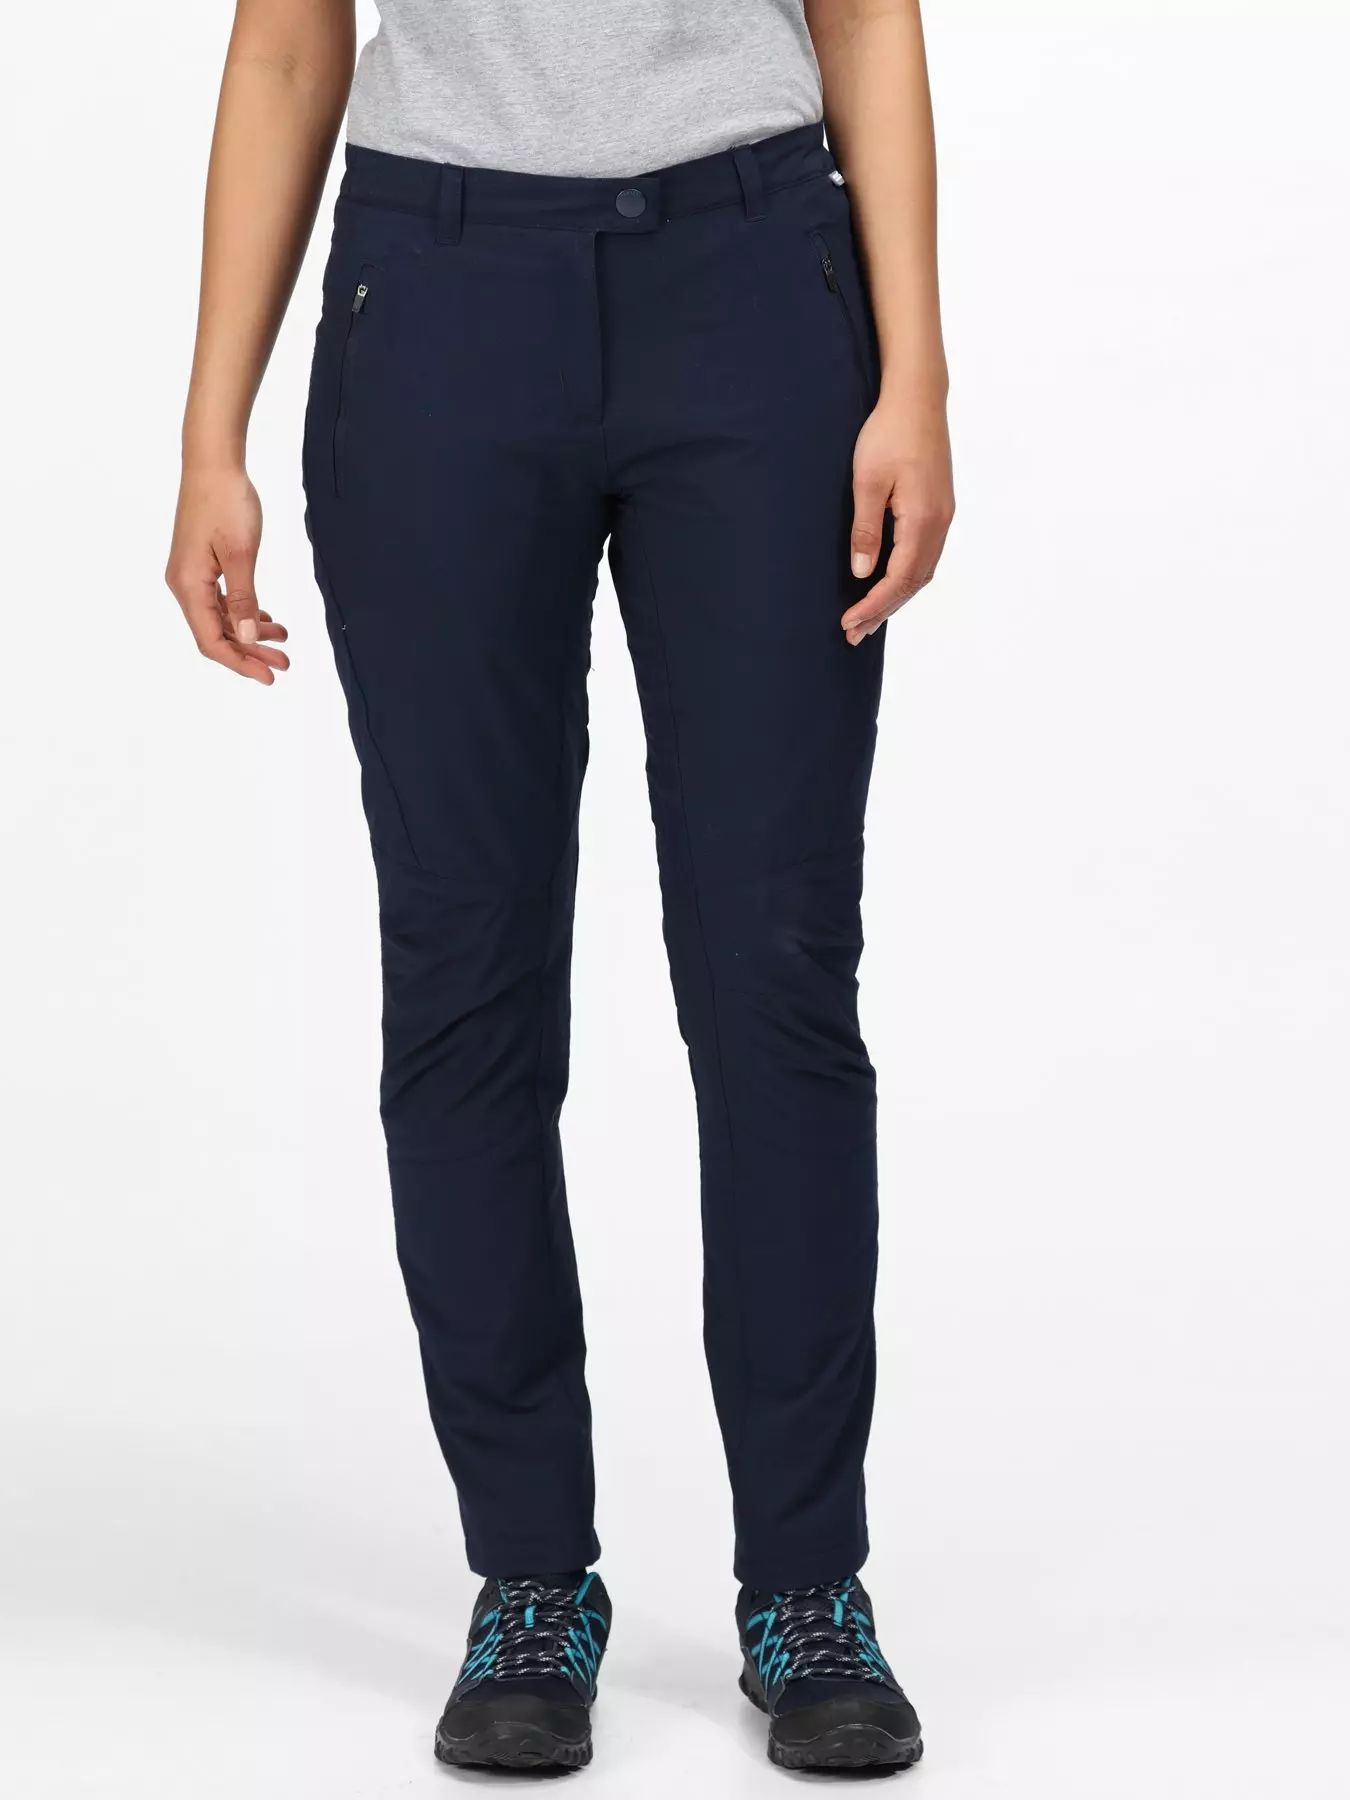 Trousers | Sports & Very clothing Ireland | | Womens leisure sports